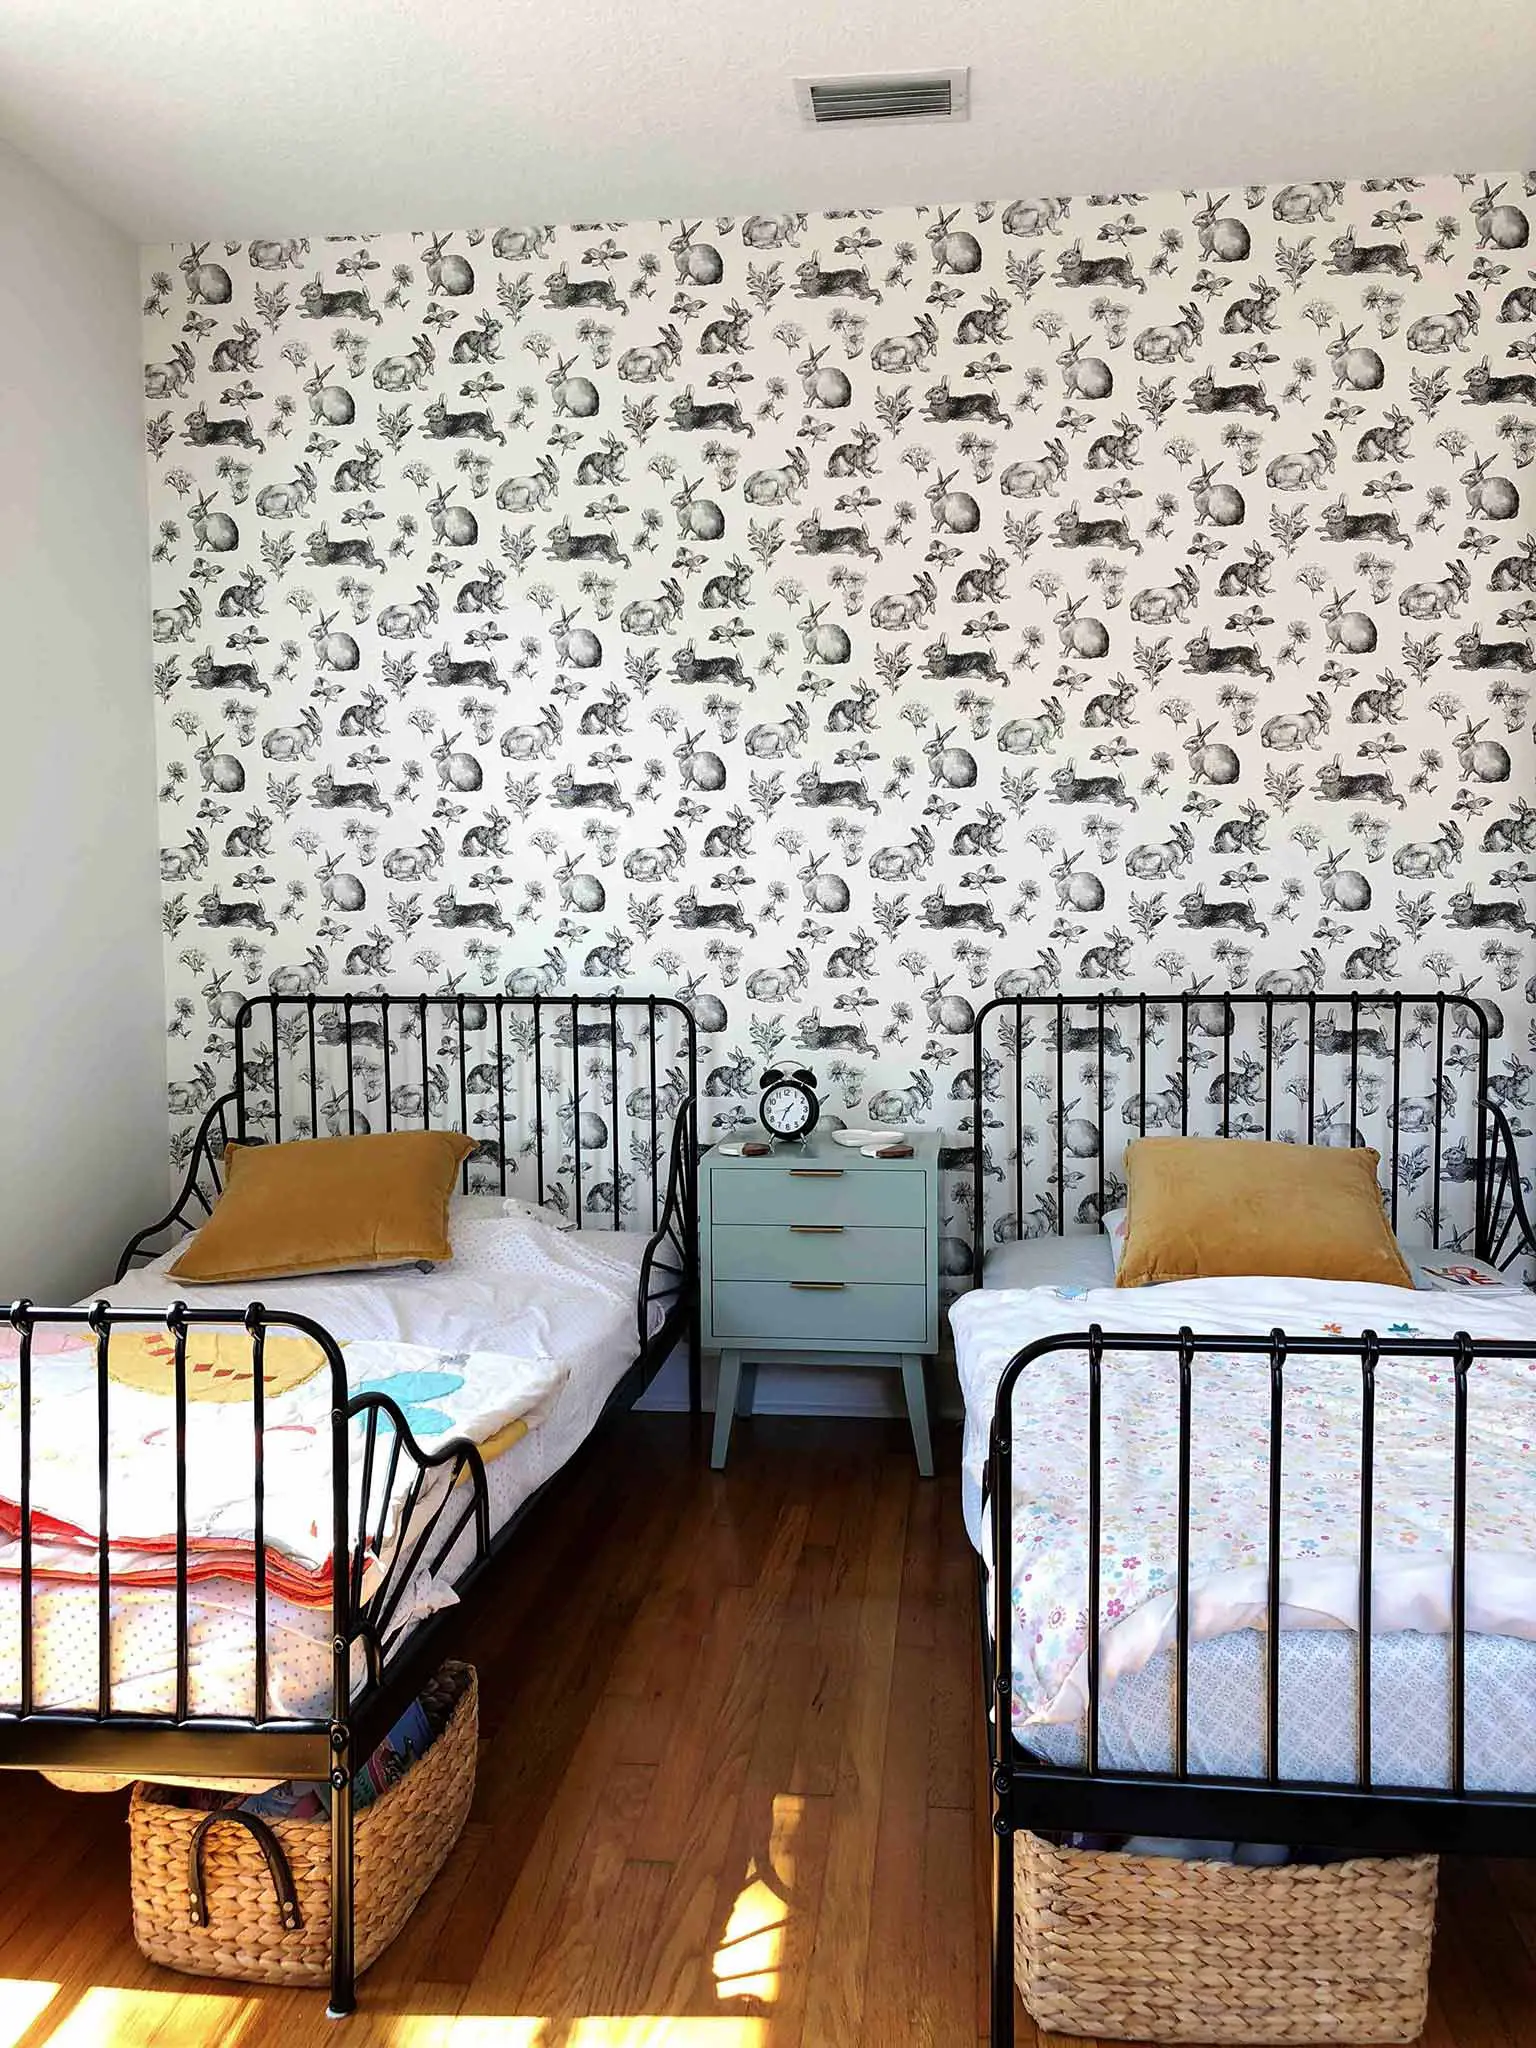 Toile lapin wallpaper and IKEA minnen beds - Guest Participant of the One Room Challenge - That Homebird Life Blog